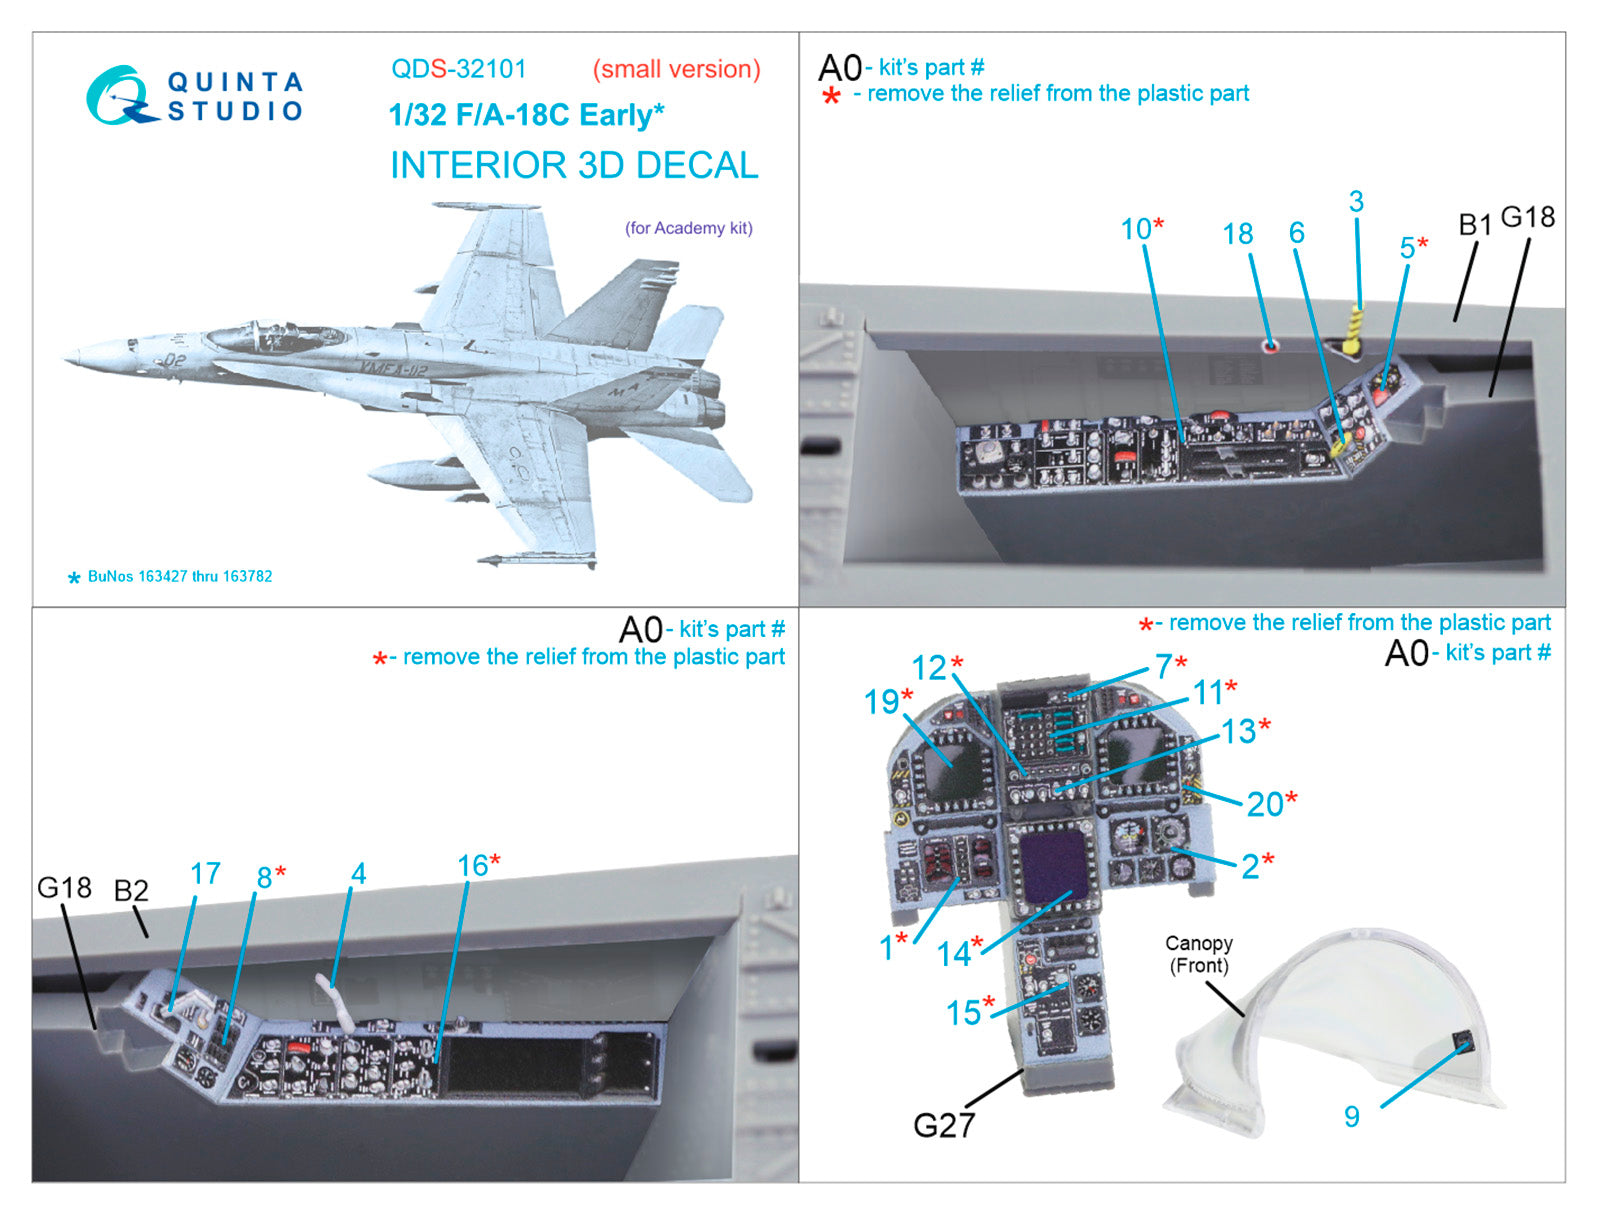 Quinta Studio - 1/32 F/A-18C Early QDS-32101 for Academy kit (small version)